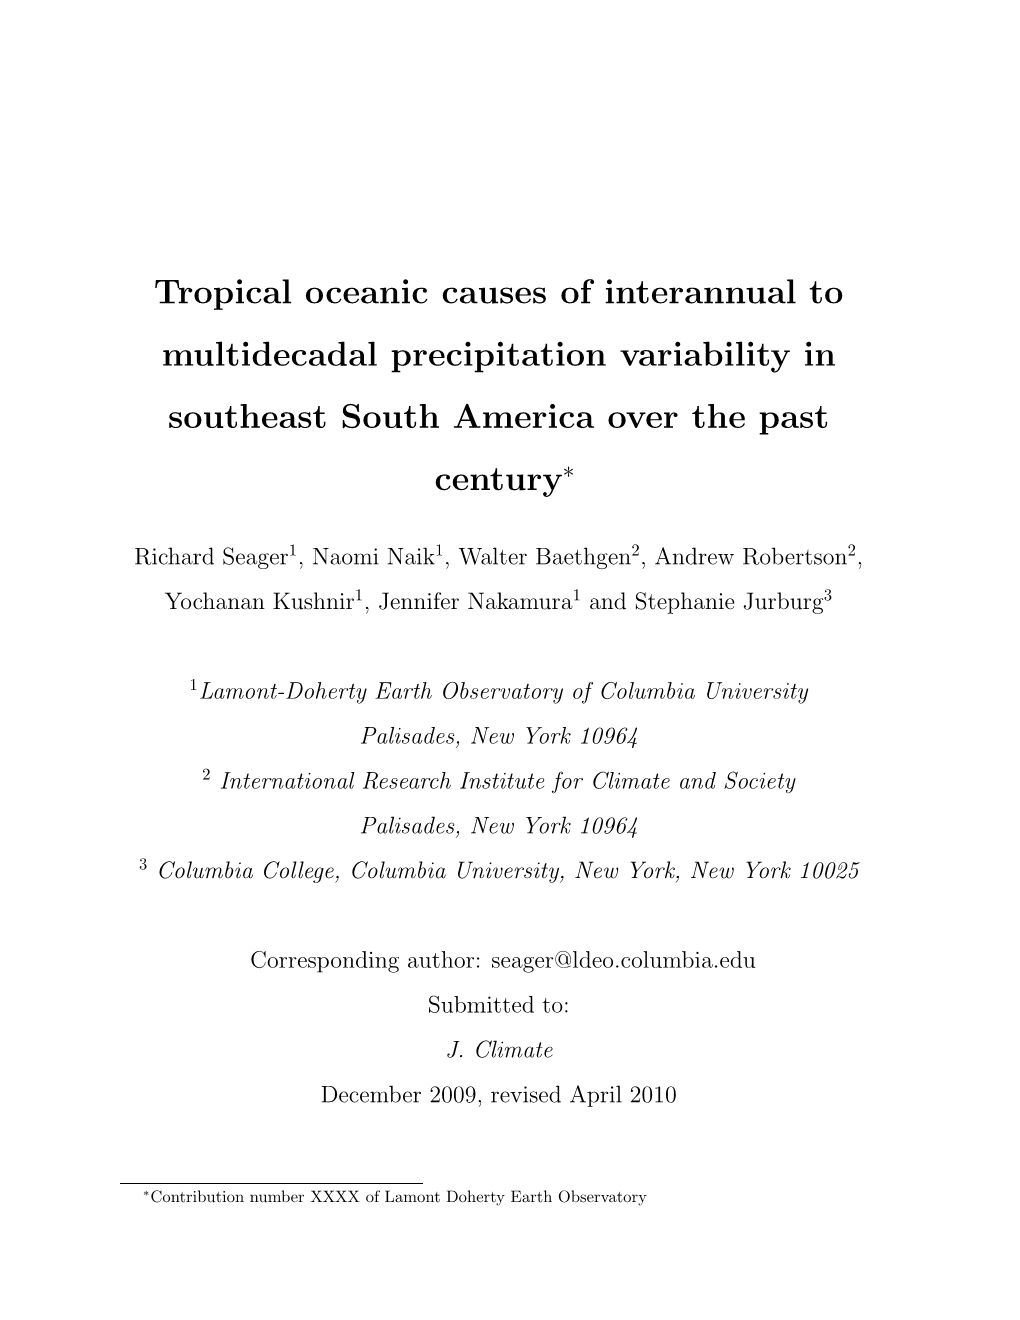 Tropical Oceanic Causes of Interannual to Multidecadal Precipitation Variability in Southeast South America Over the Past Century∗